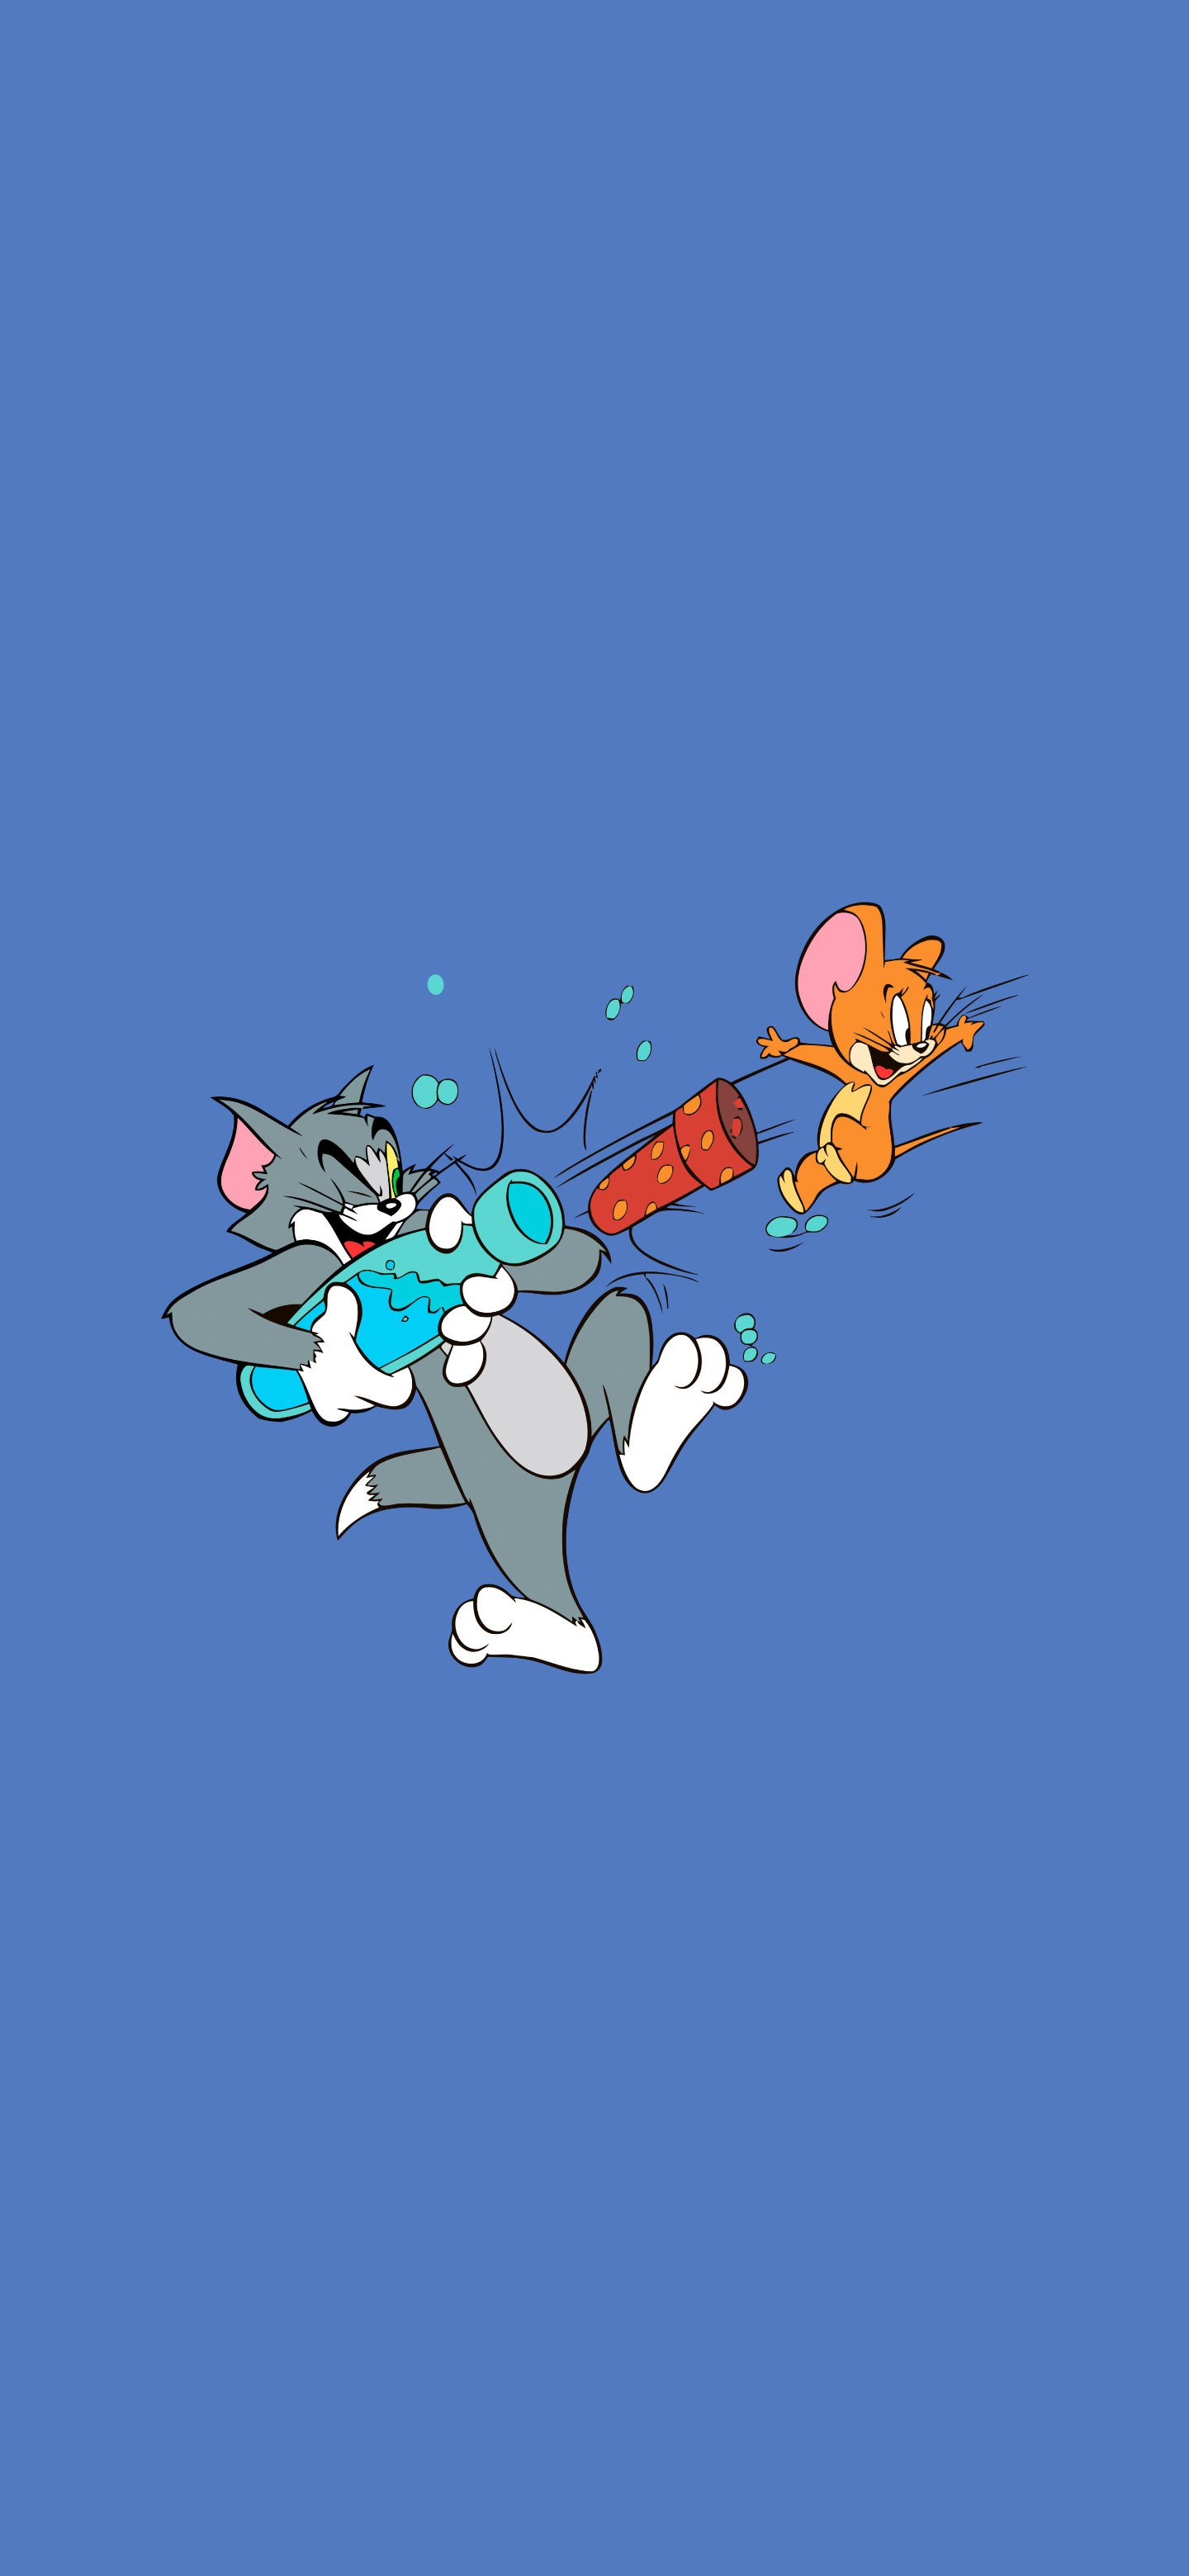 General 1440x3120 cartoon Tom and Jerry simple background minimalism blue background